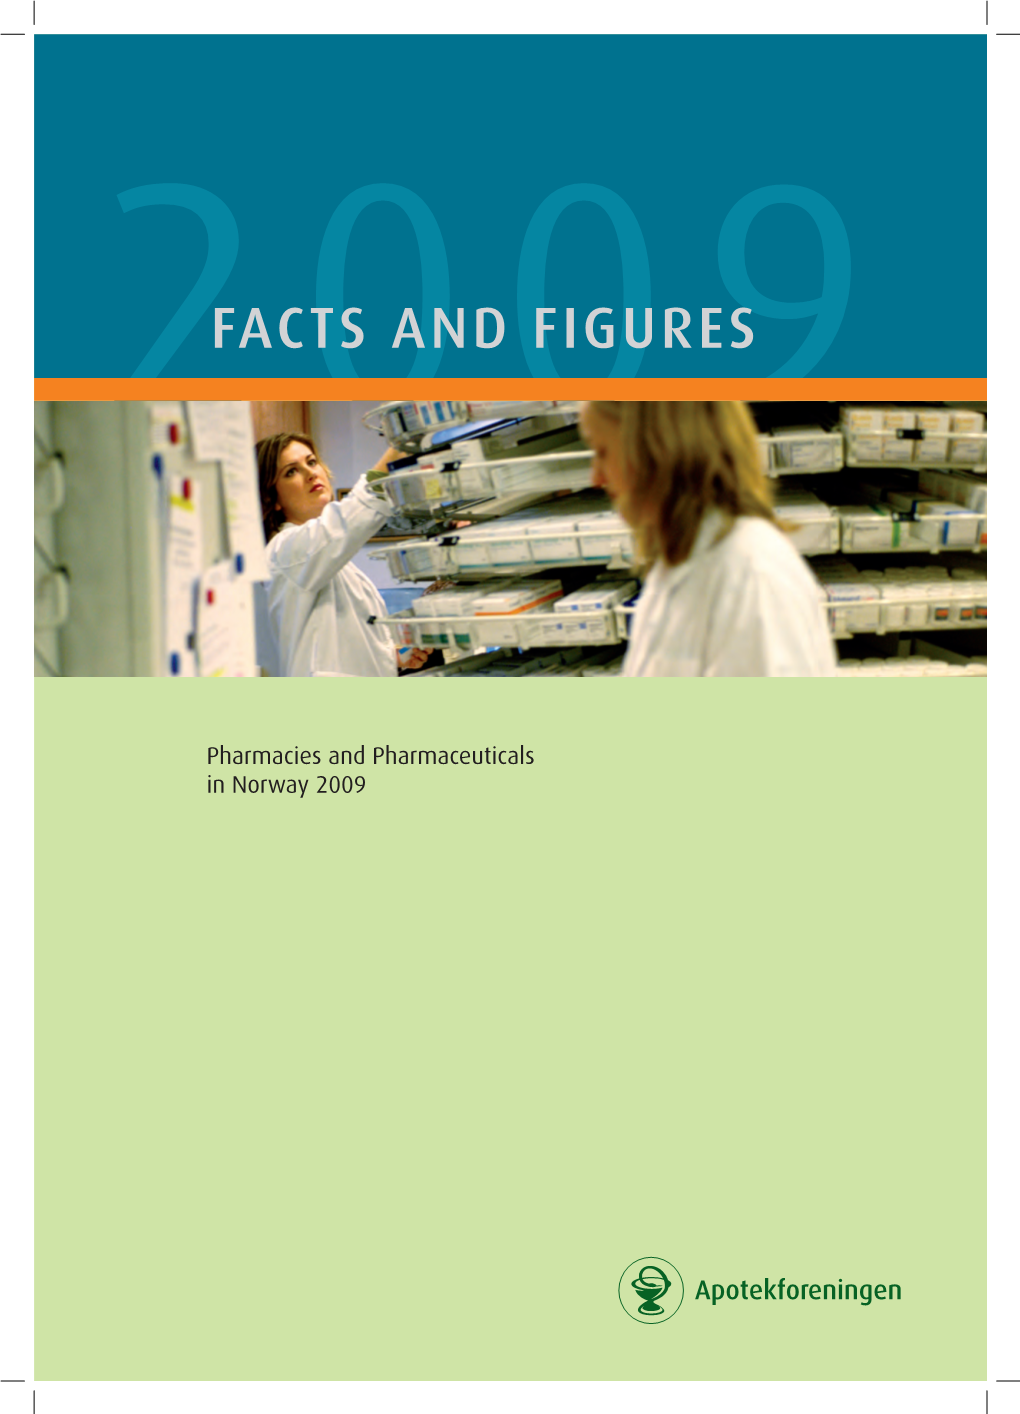 Facts and Figures 2009 Pharmacies And